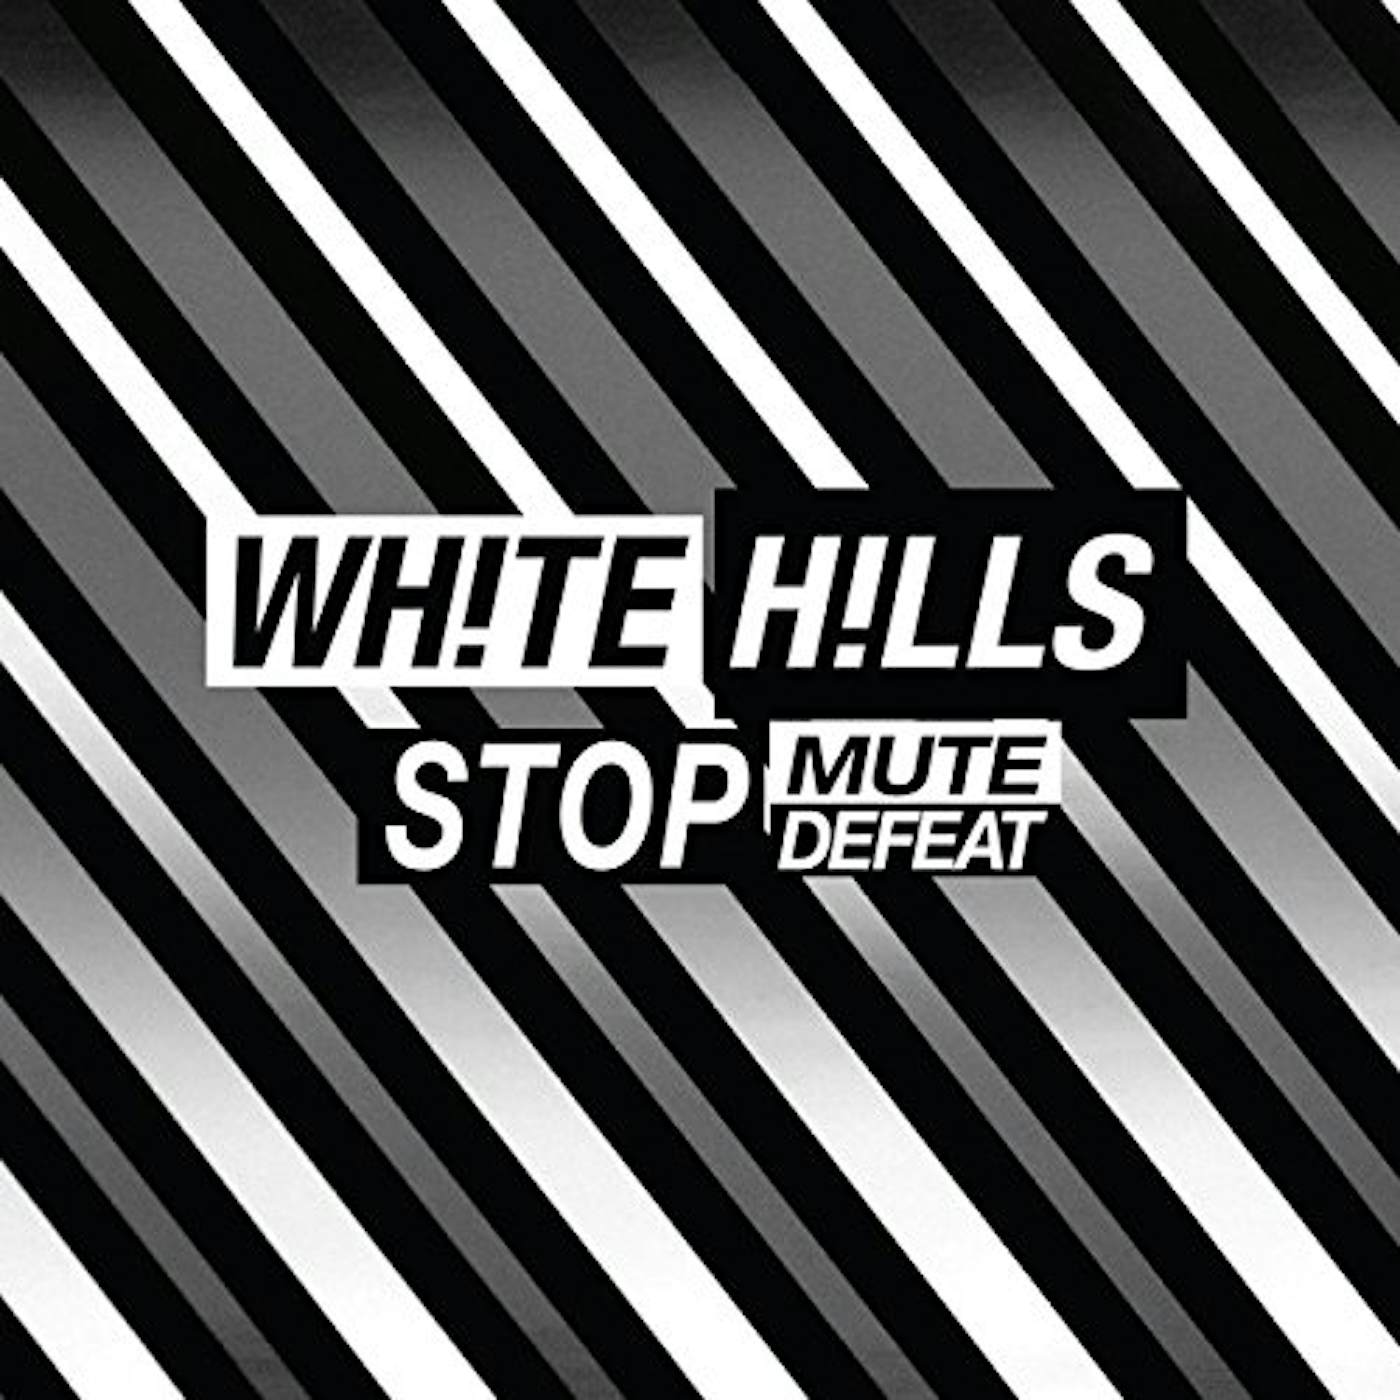 White Hills STOP MUTE DEFEAT (DL CARD) Vinyl Record